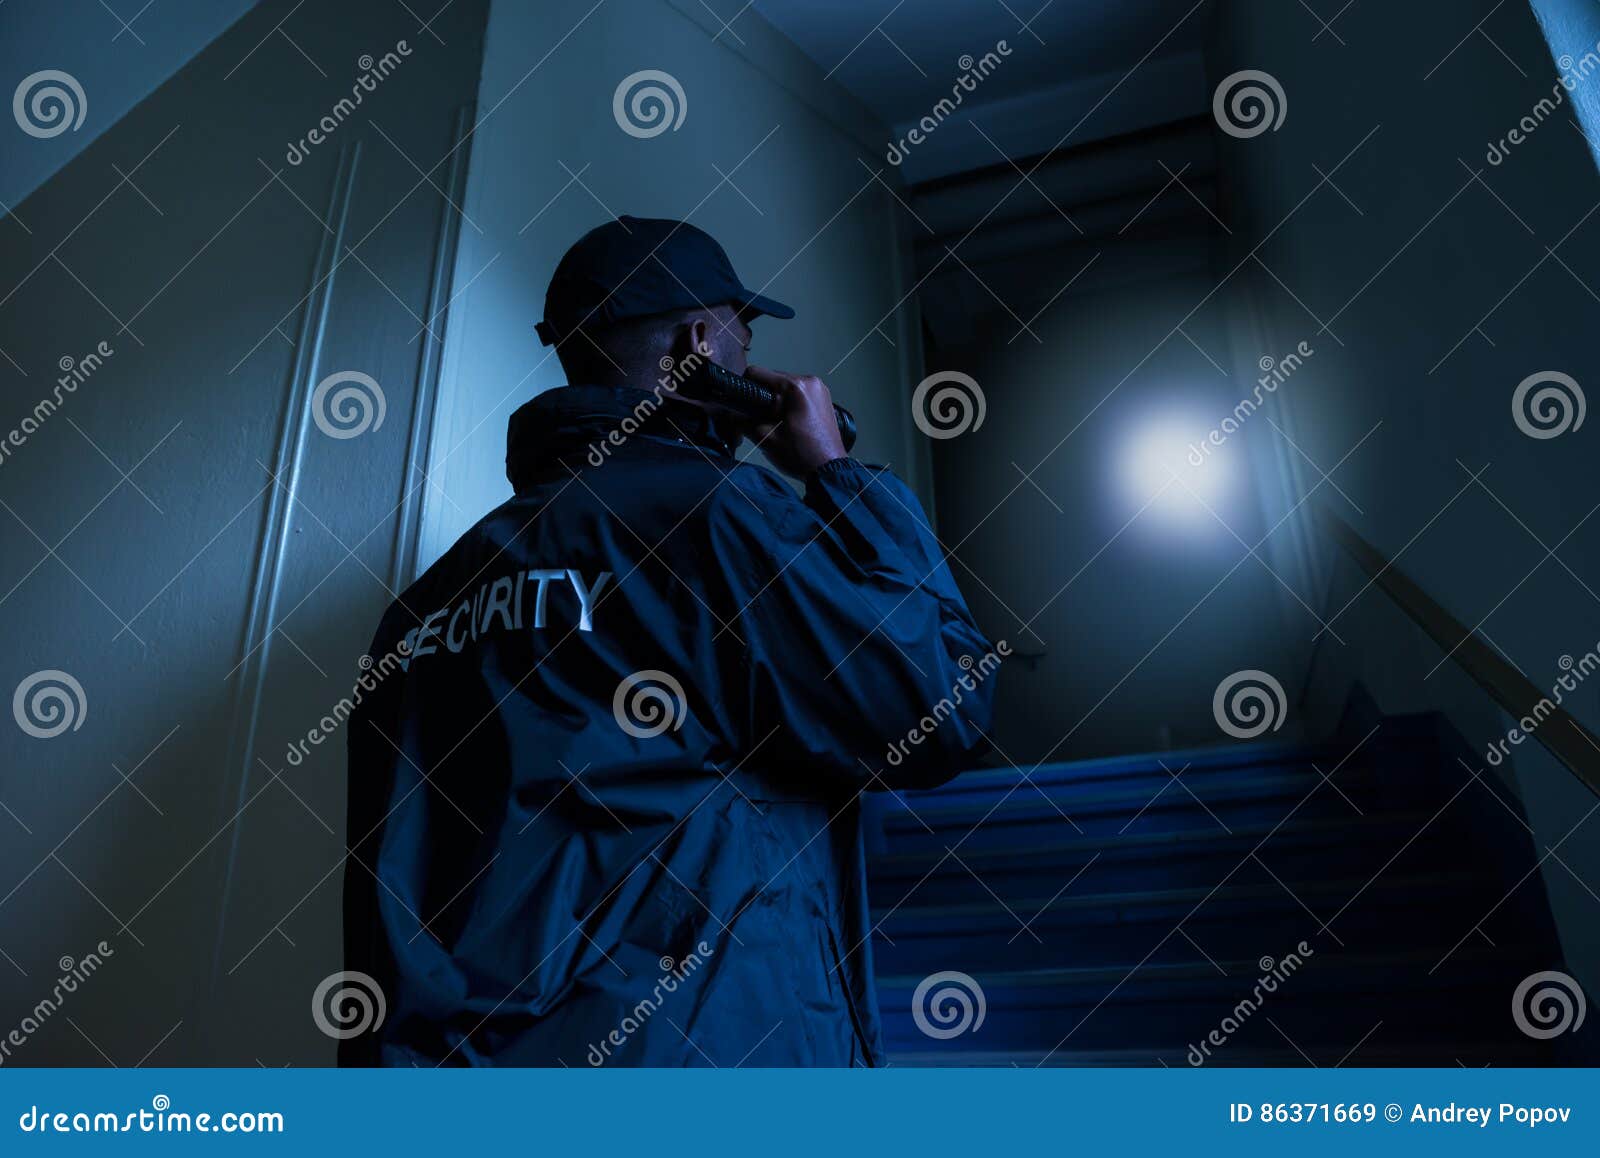 security guard with flashlight